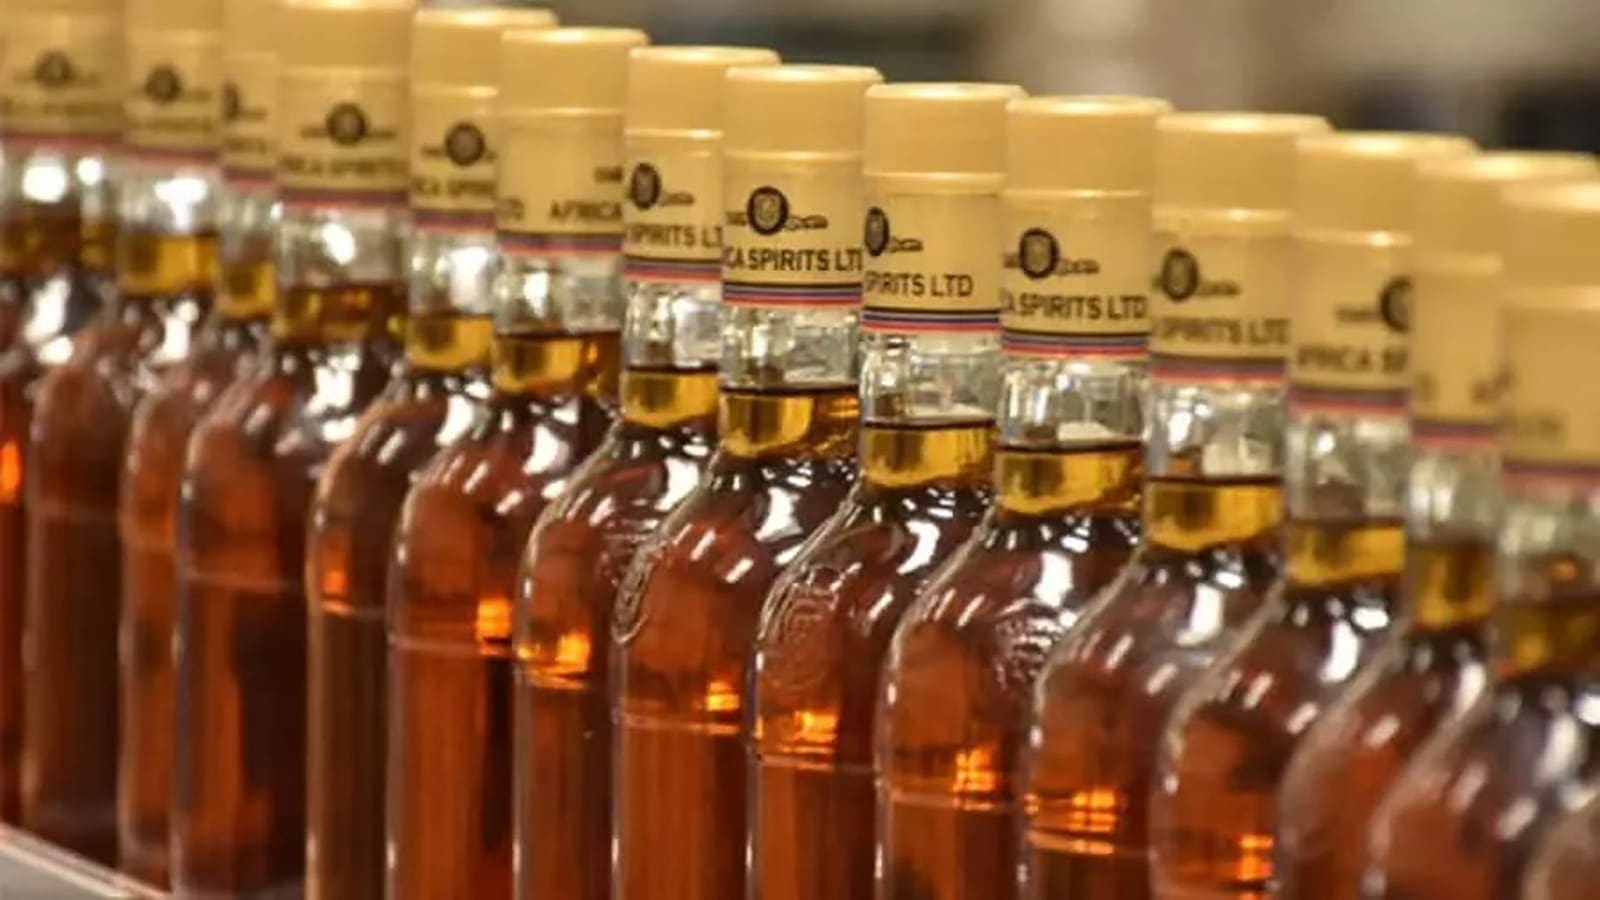 Zimbabwe’s African Distillers Limited reports rise in sales volume triggered by surge in spirits demand